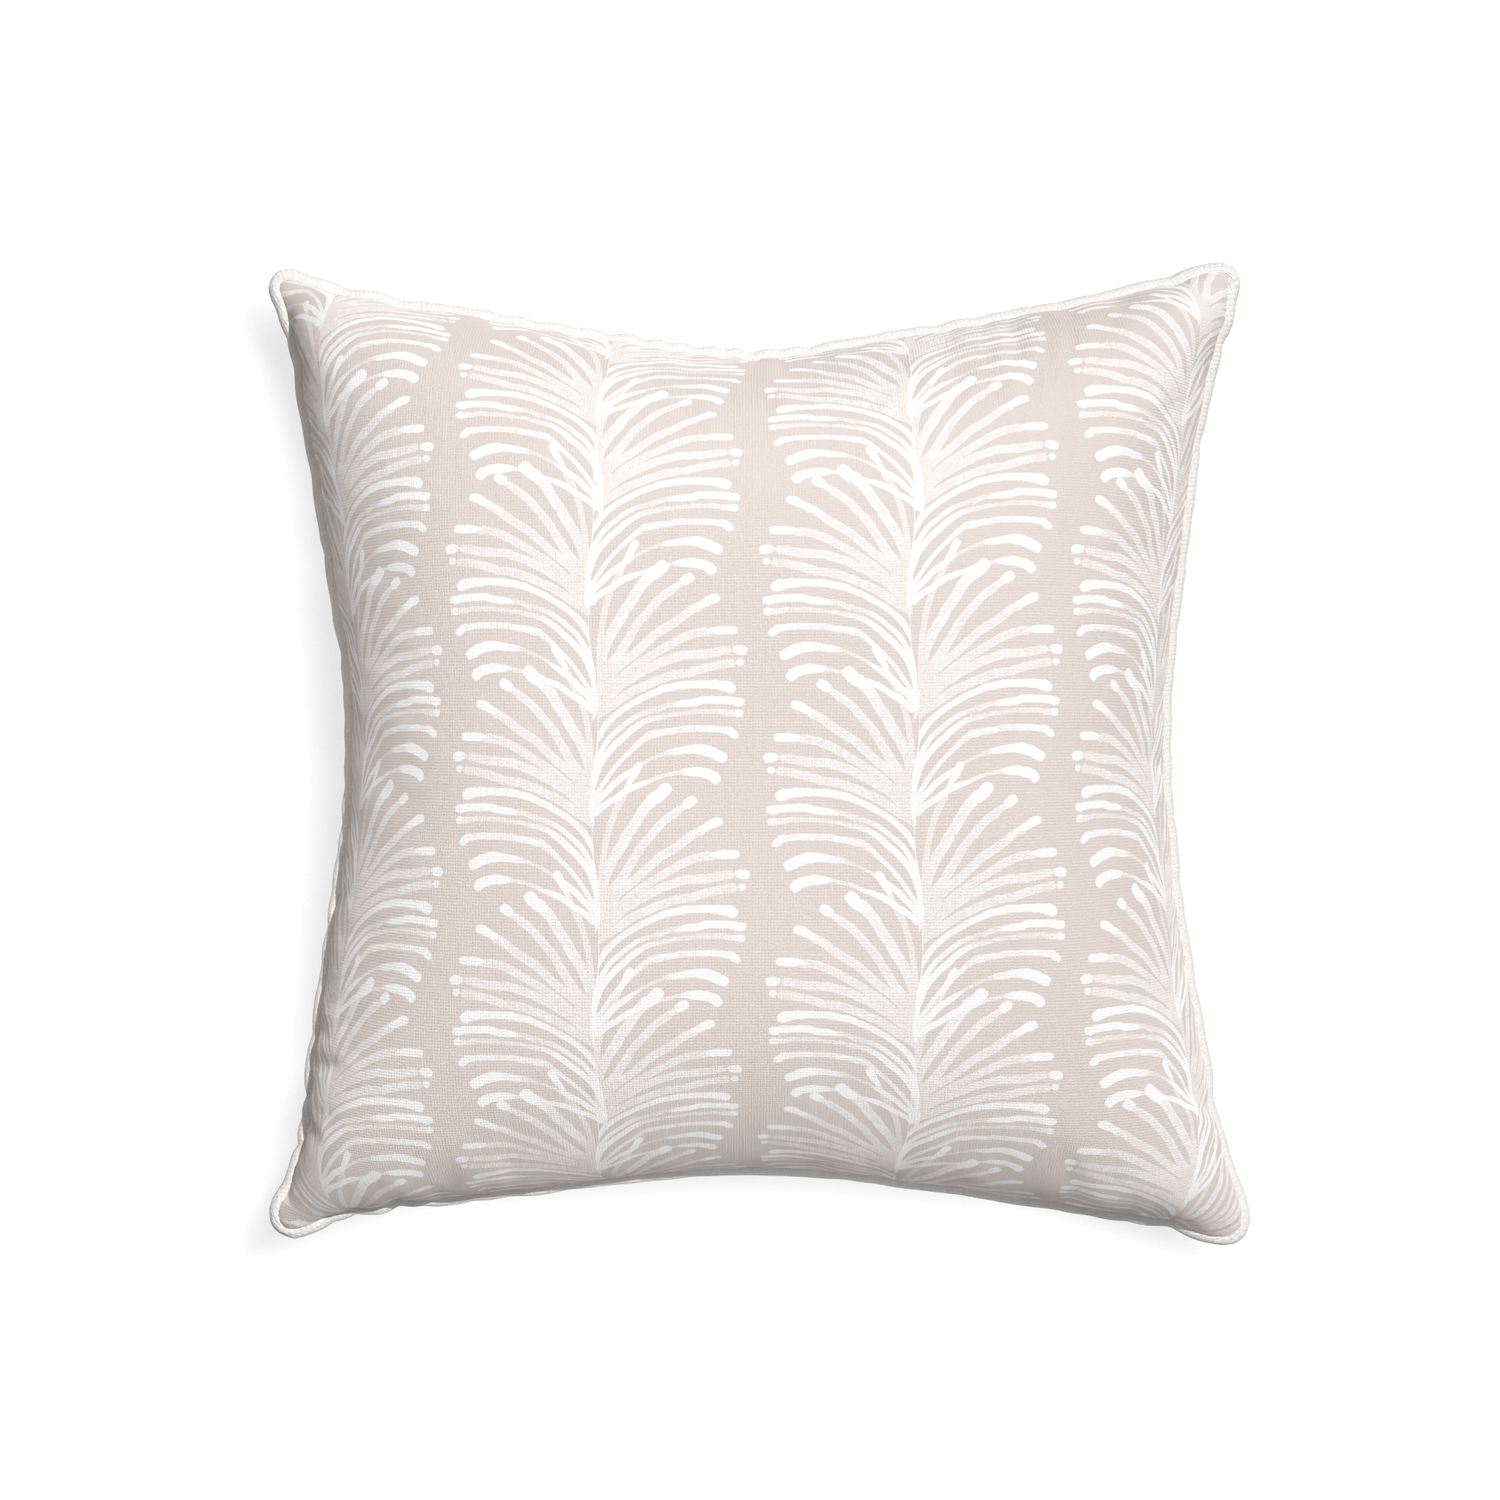 22-square emma sand custom sand colored botanical stripepillow with snow piping on white background